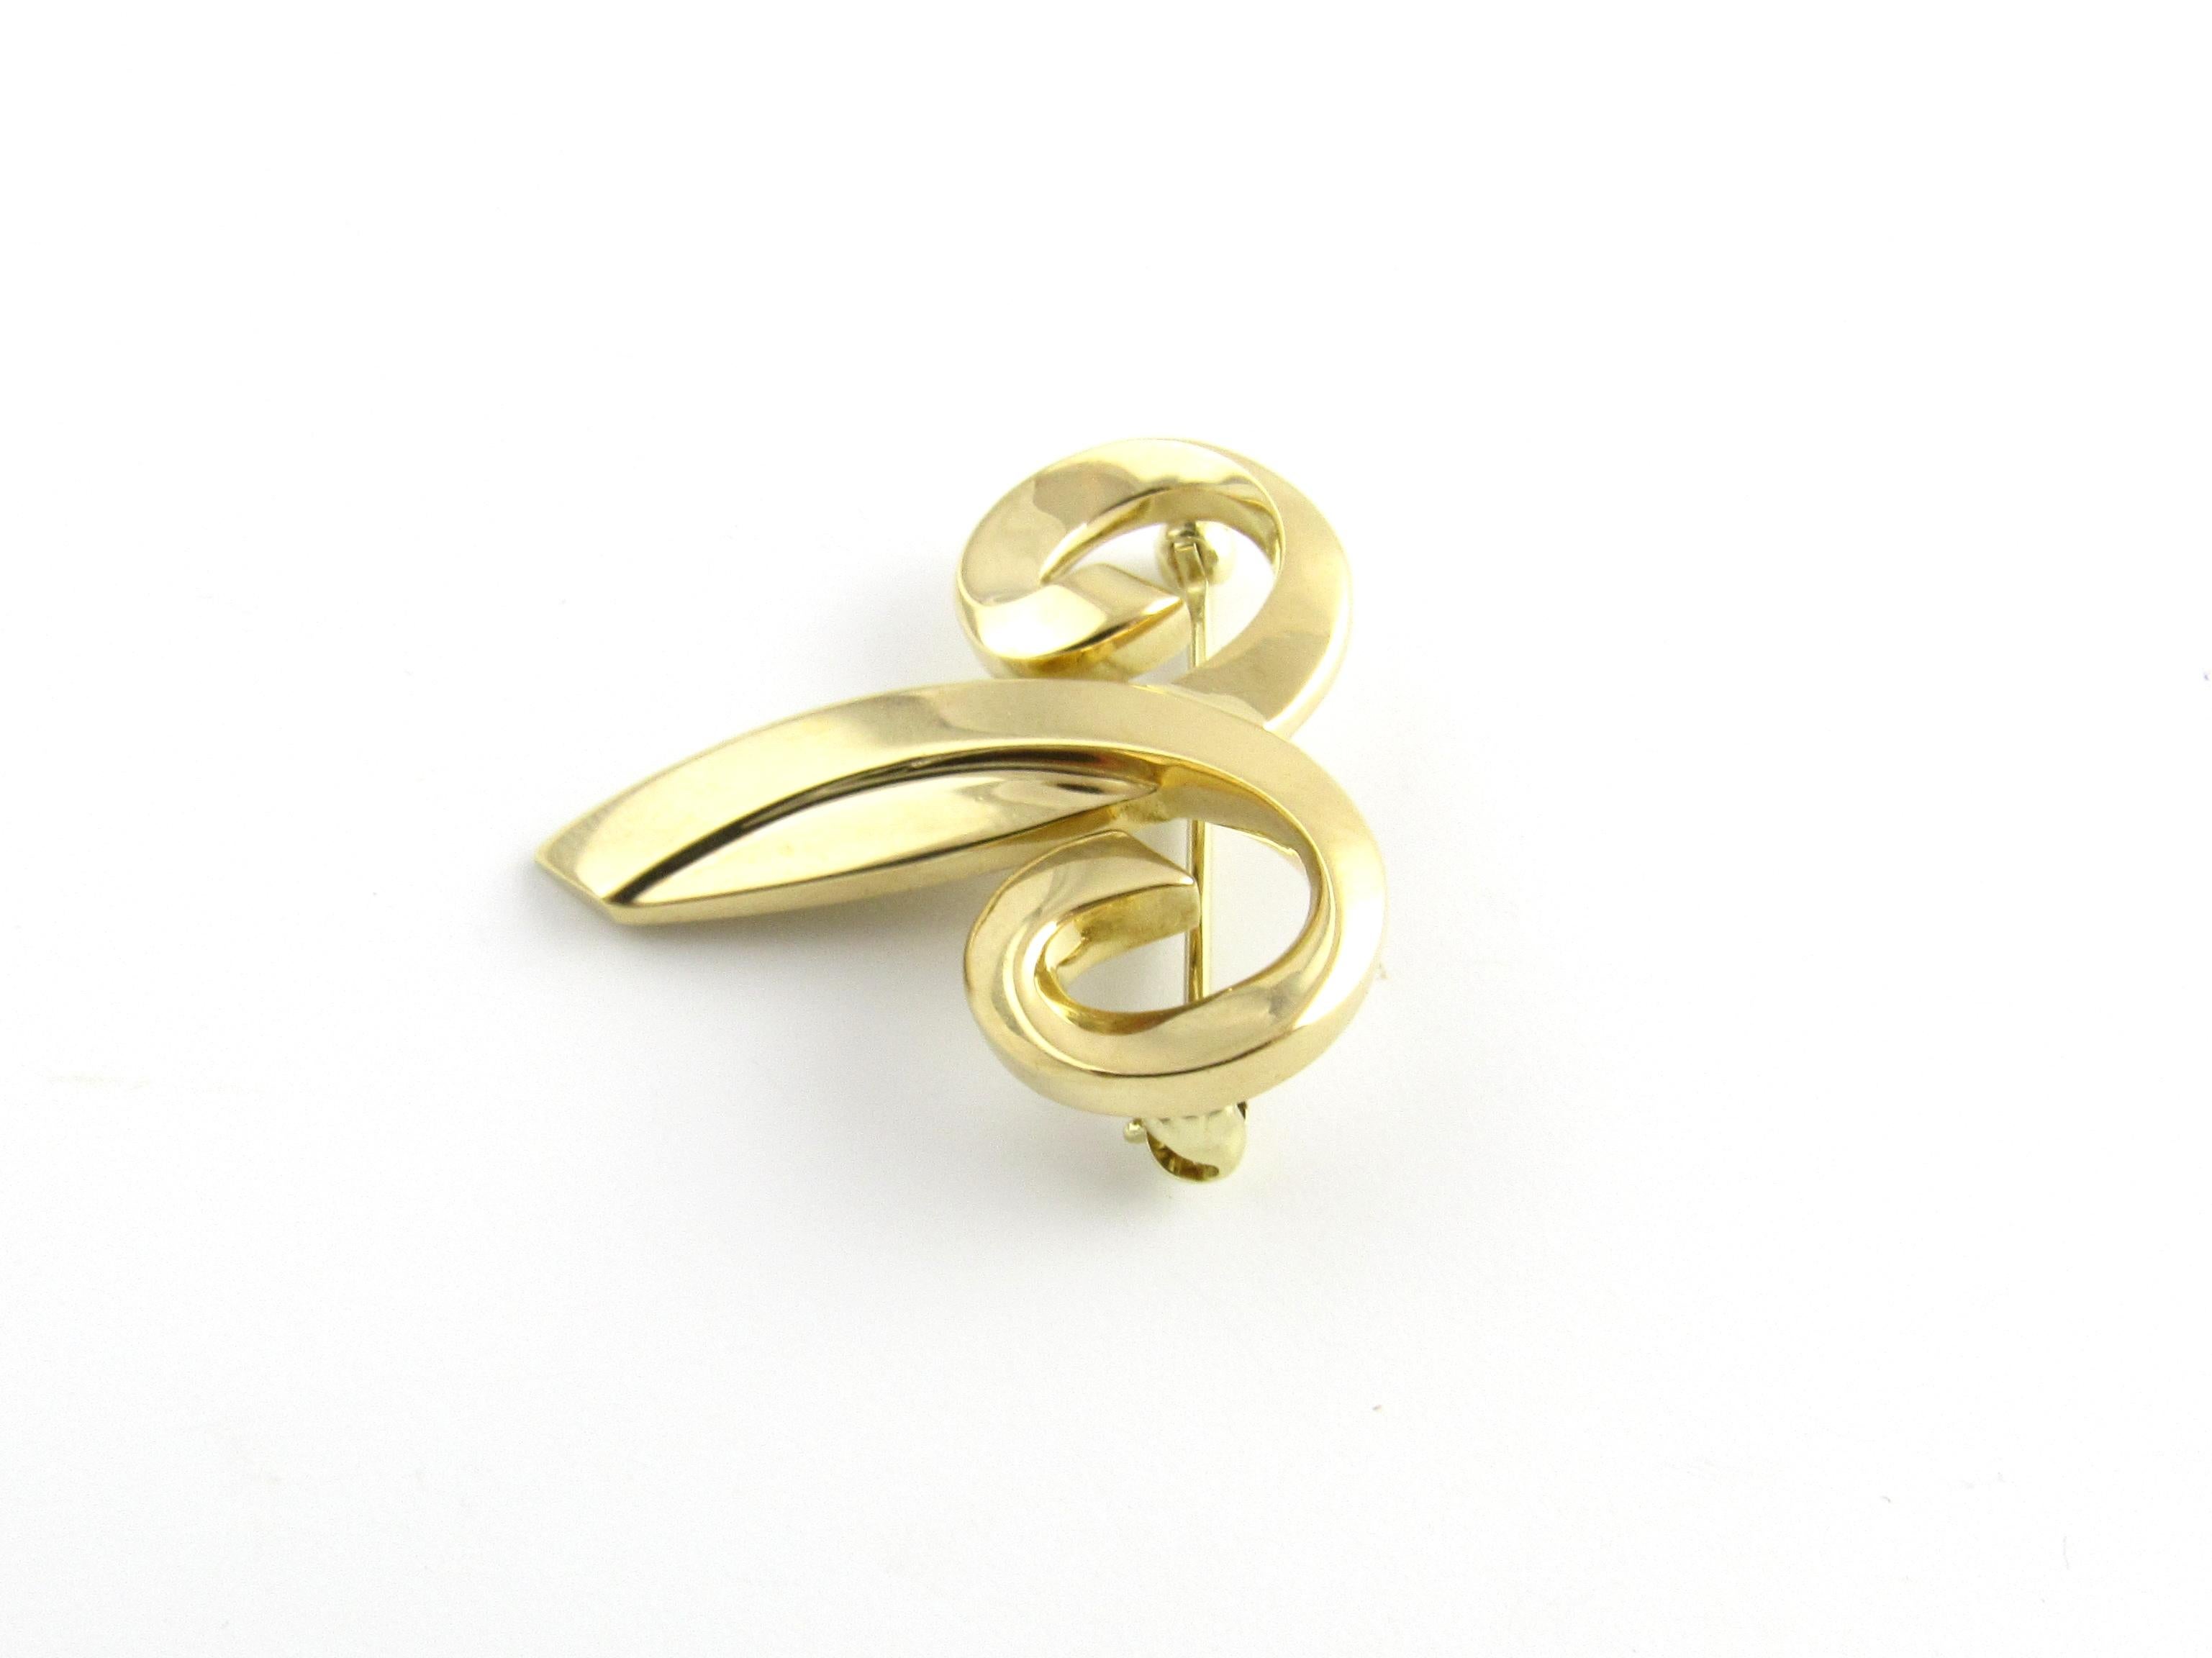 Tiffany & Co. Paloma Picasso 18K Yellow Gold Aries Zodiac Pin Brooch

This authentic Tiffany & Co. brooch is approx. 1